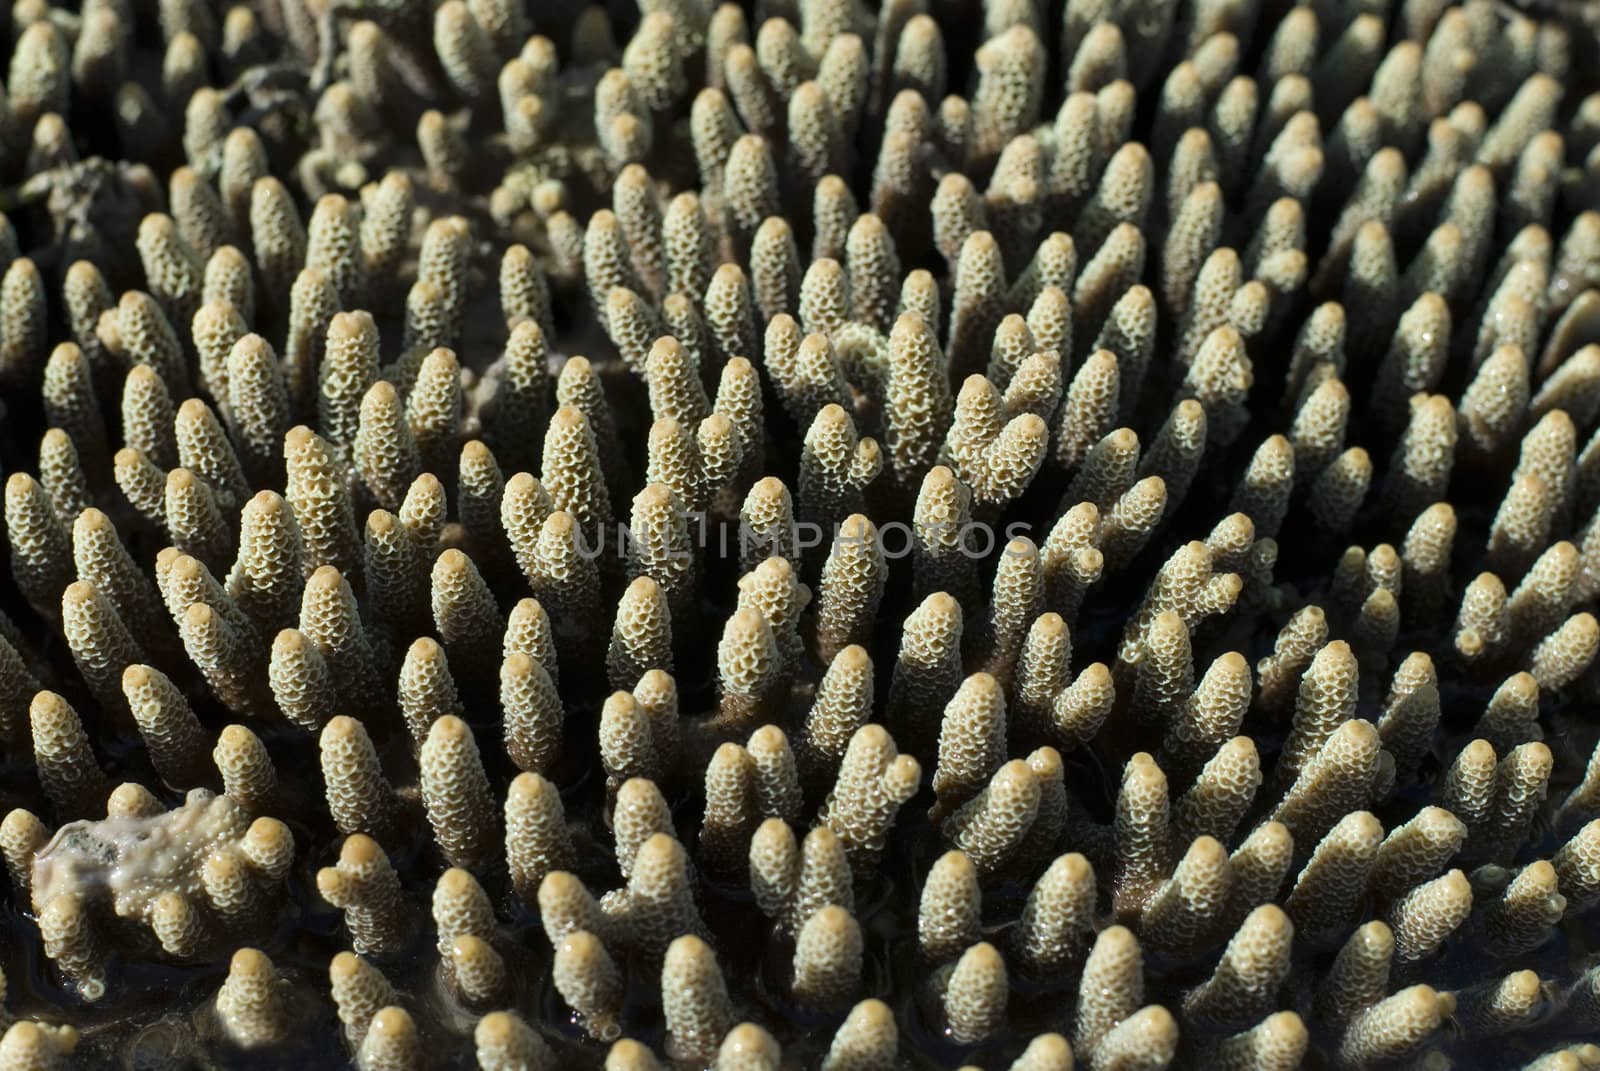 Acropora millipora coral fingers by stockarch